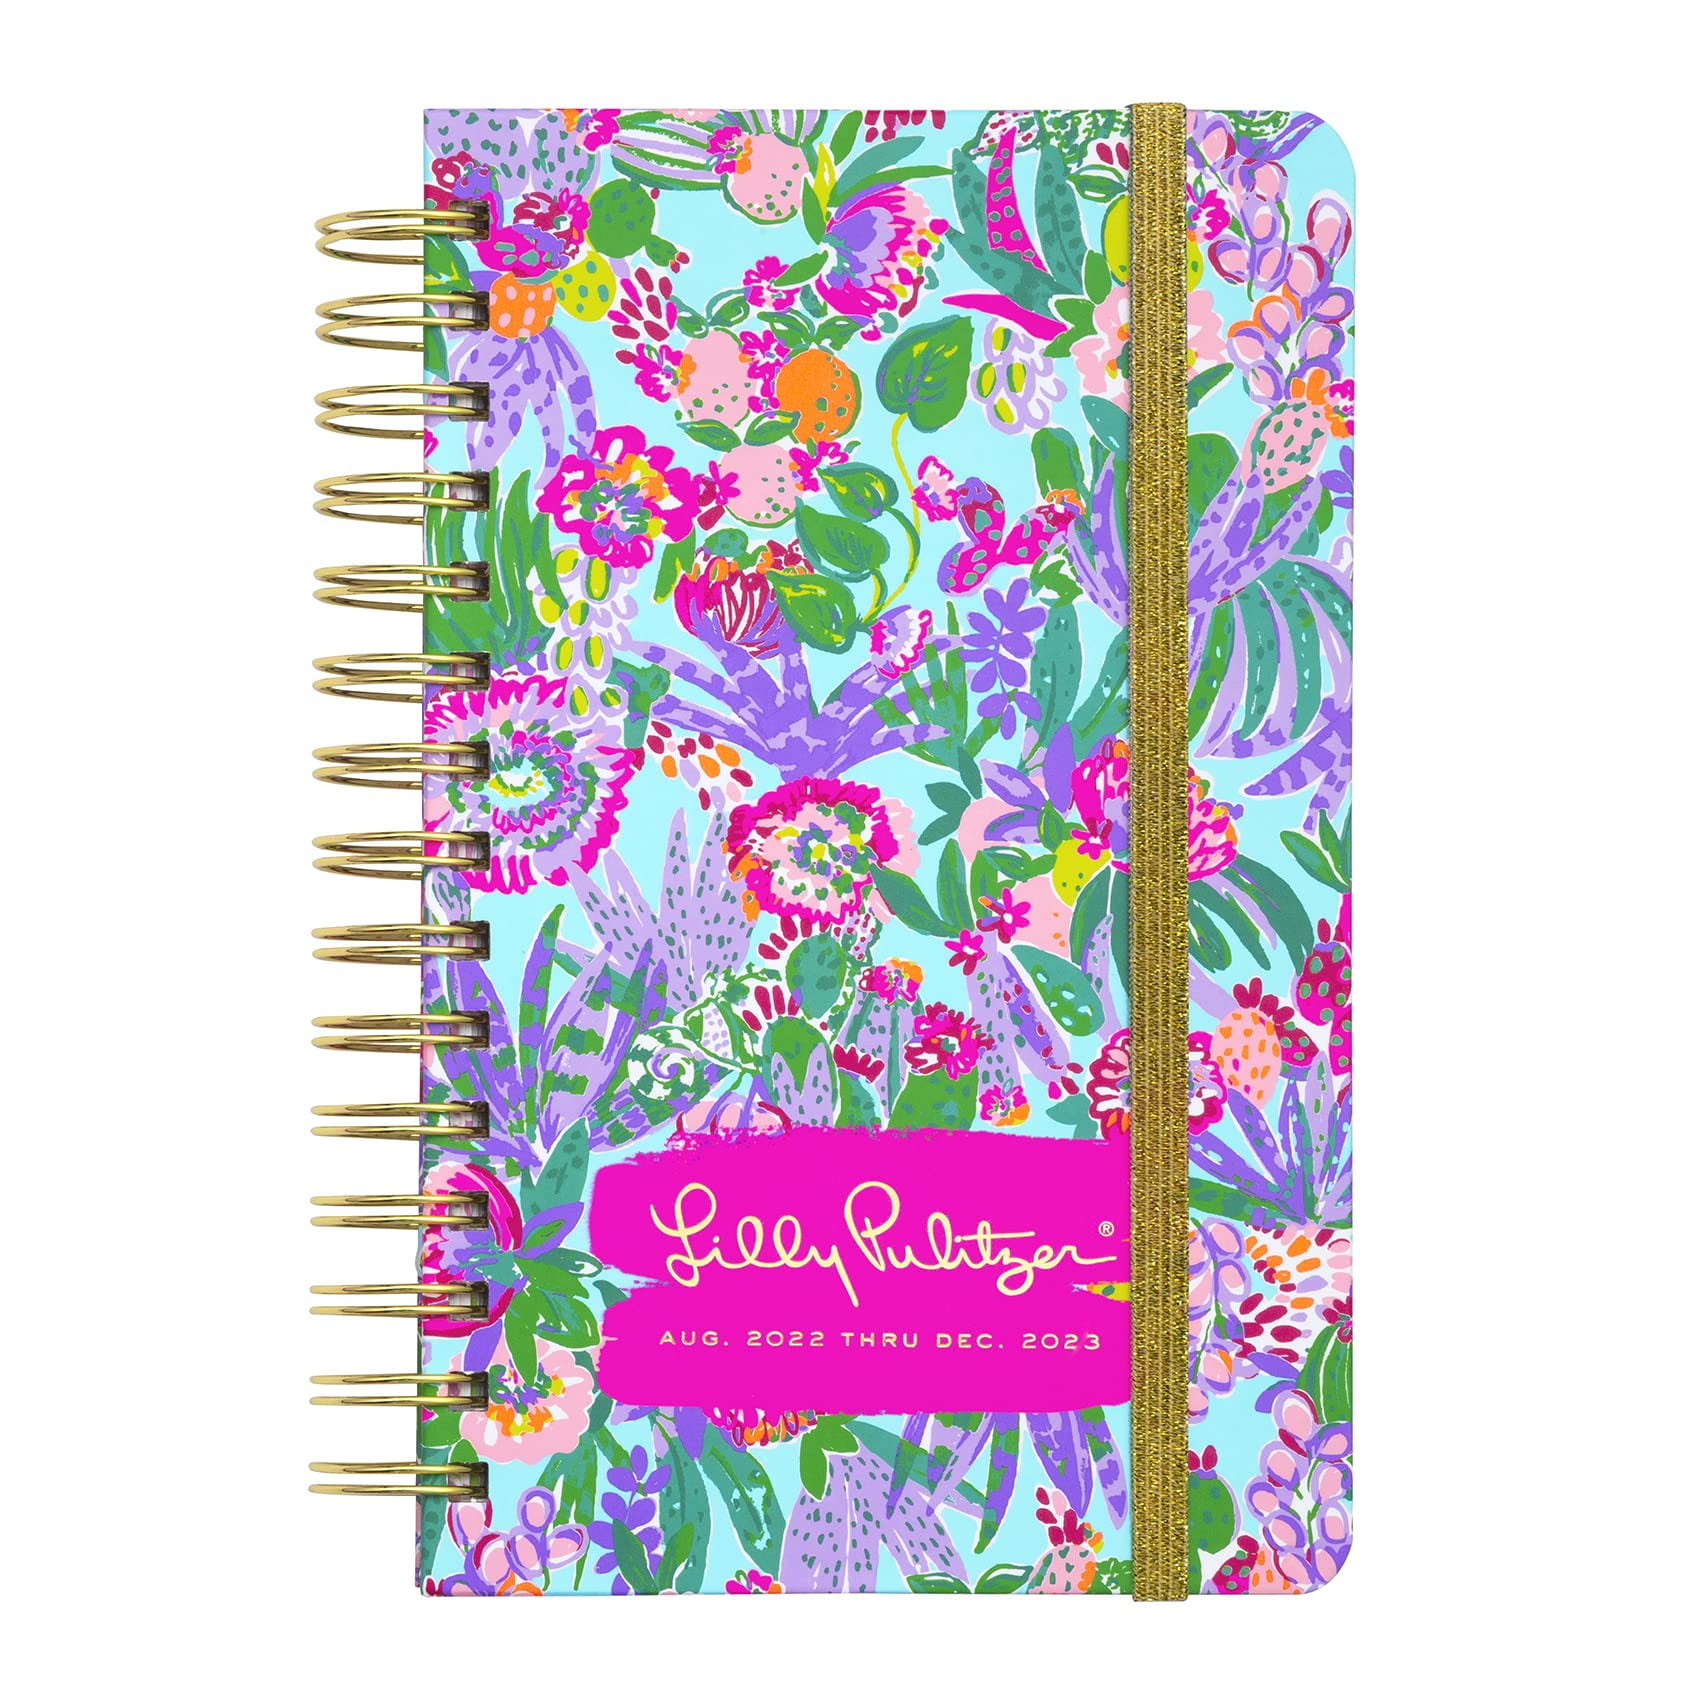 mengsel reservoir zin Lilly Pulitzer Daily Planner 2022-2023, Medium Agenda Dated August 2022 -  December 2023, Hardcover Cute Planner with Weekly & Monthly Calendars,  Stickers, Pockets, & Spiral Binding, Me and My Zesty - Walmart.com